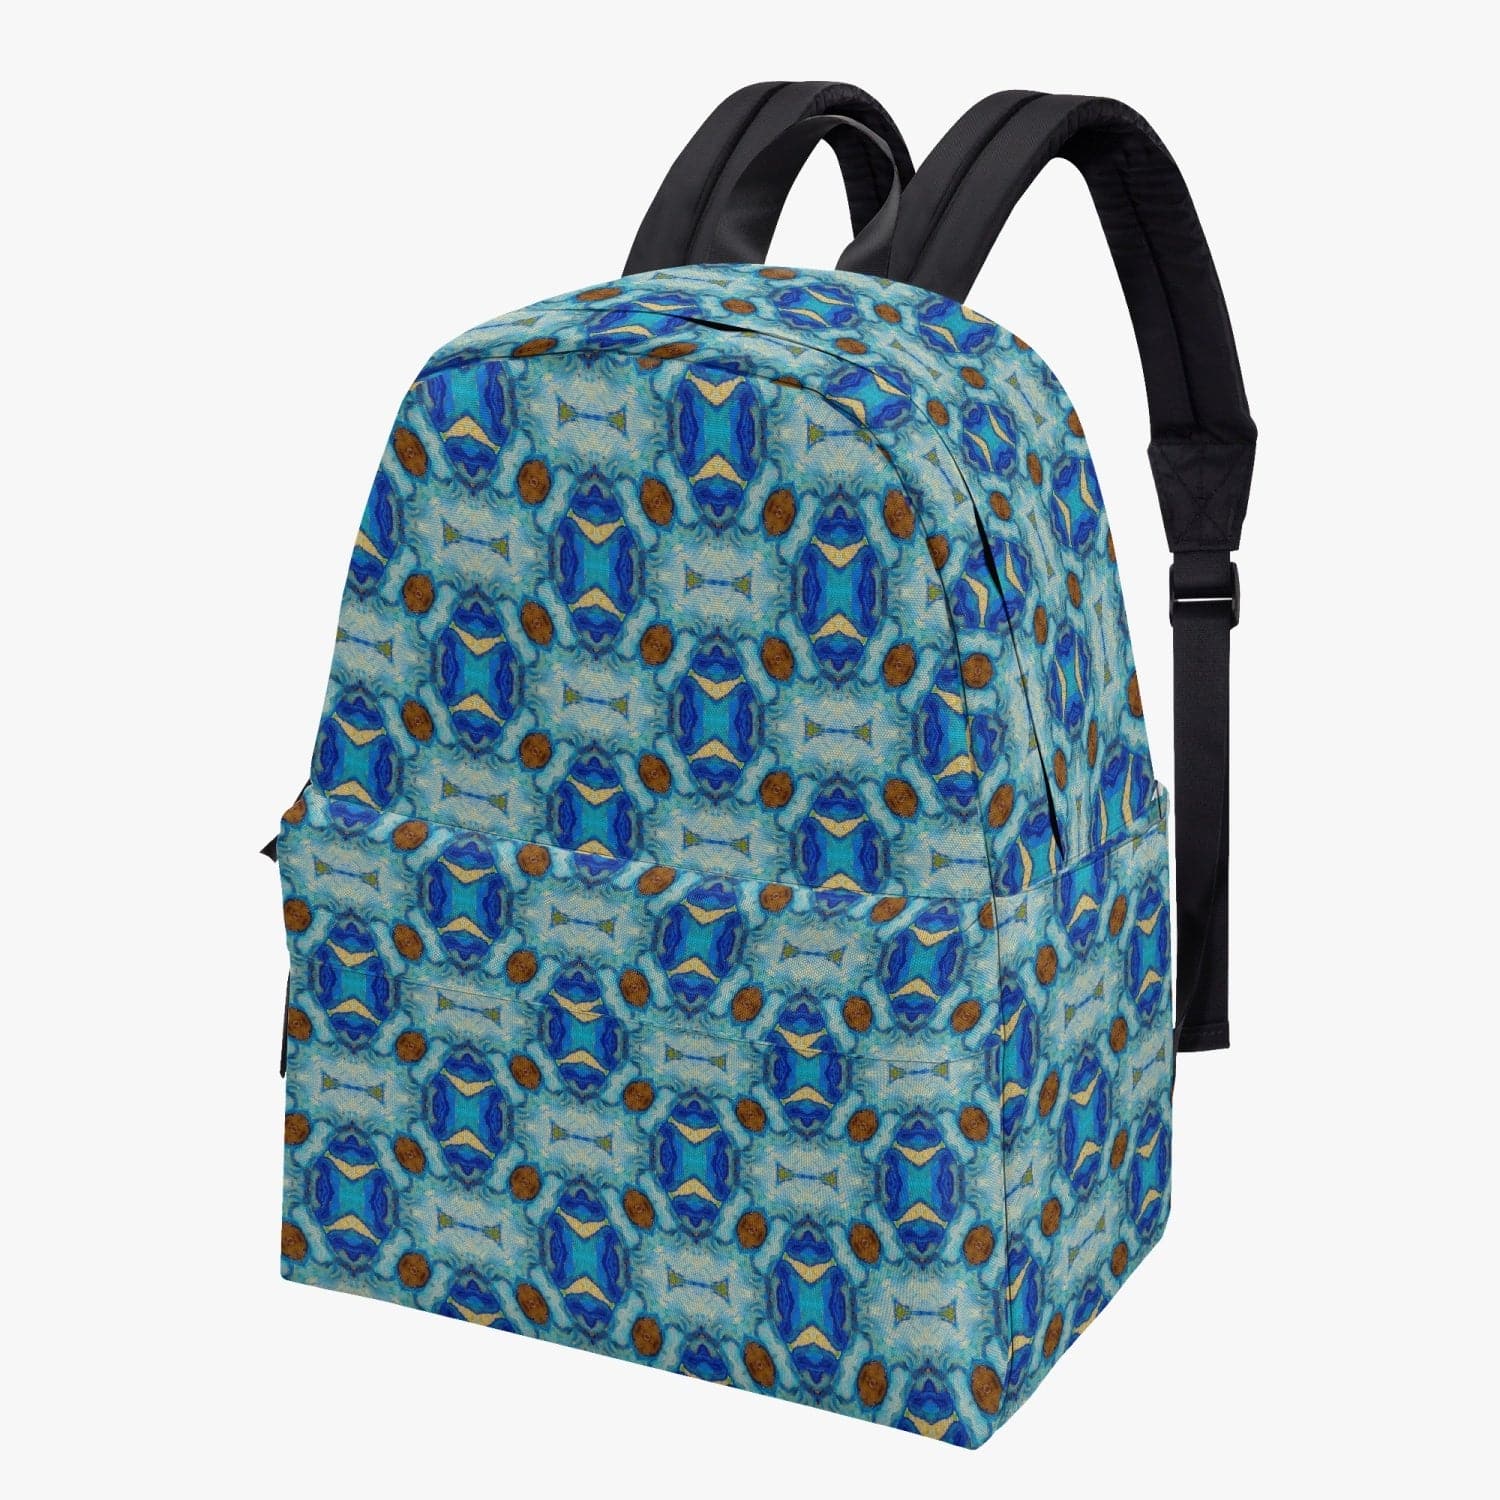 First Steps after Midnight blue,  Canvas Backpack, by Sensus Studio Design